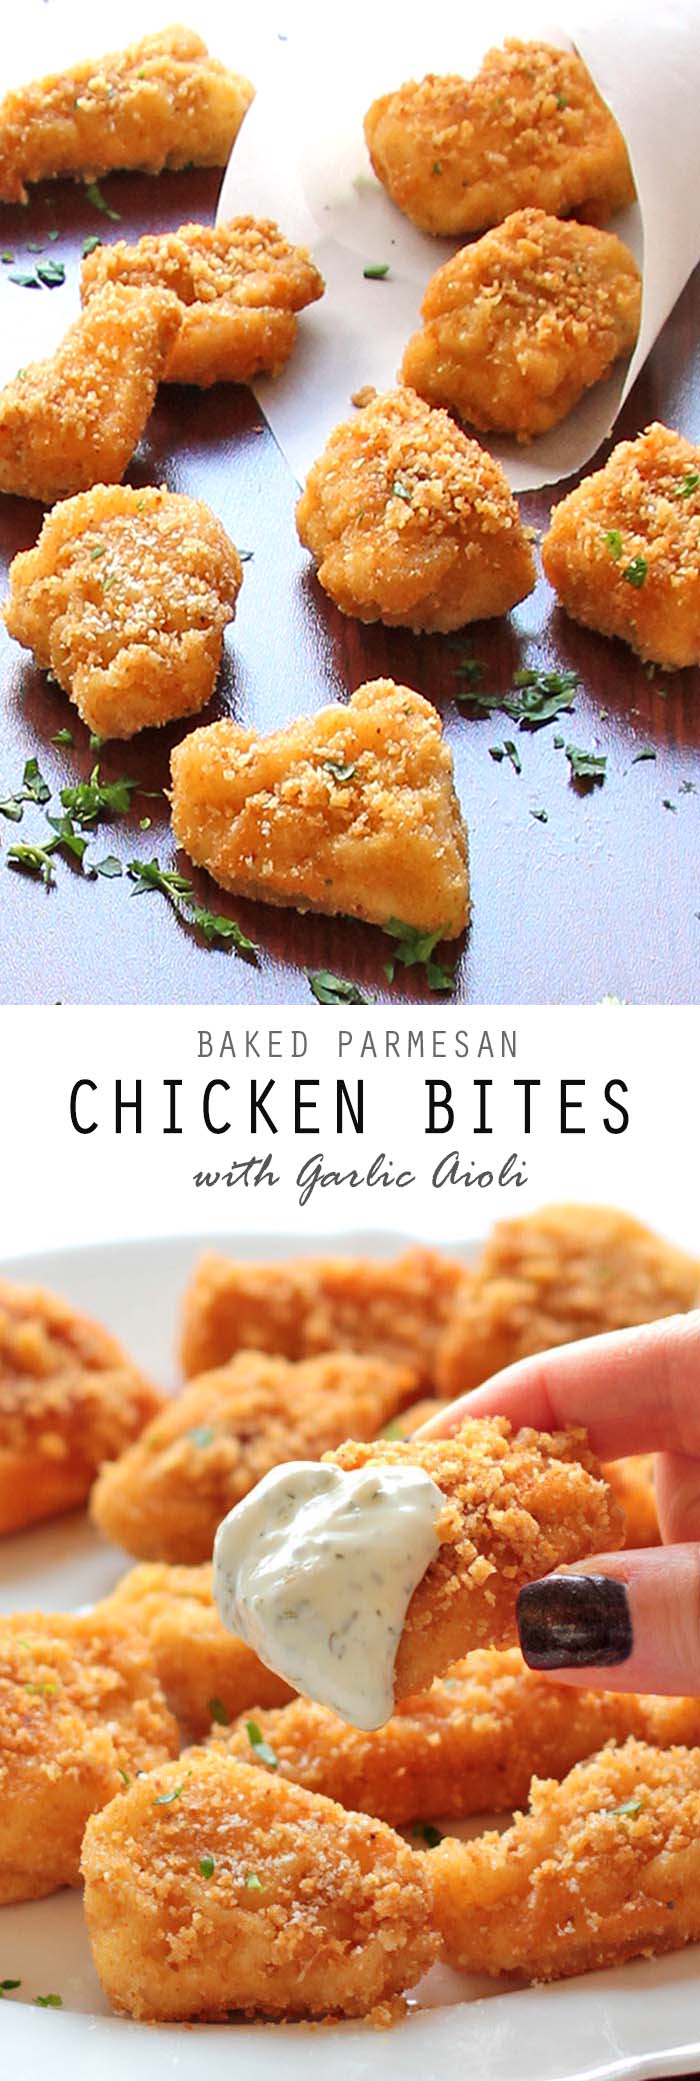 These Baked Parmesan Chicken Bites are so delicious and ridiculously easy. With only 5 ingredients, how can you not try these bad boys out?!